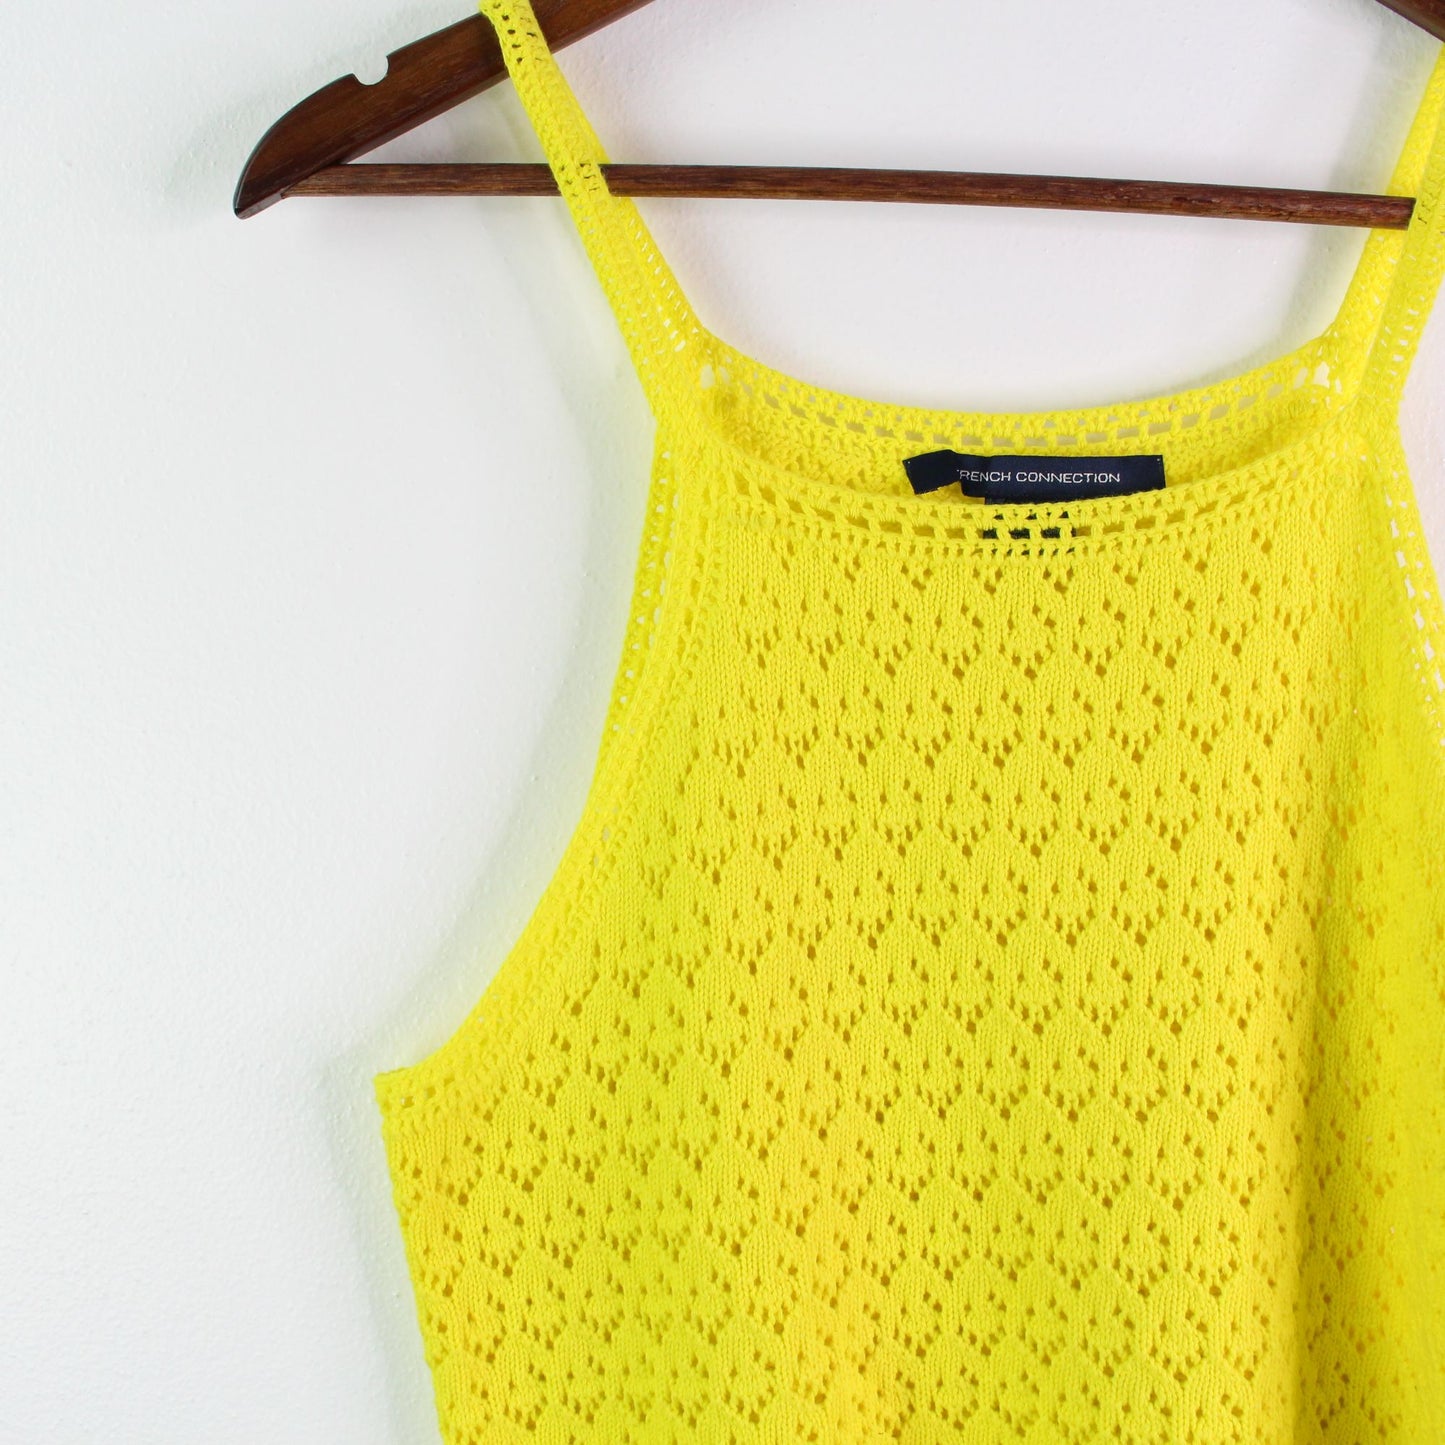 French Connection Nora Crochet Cotton Tank Top in Blazing Yellow L